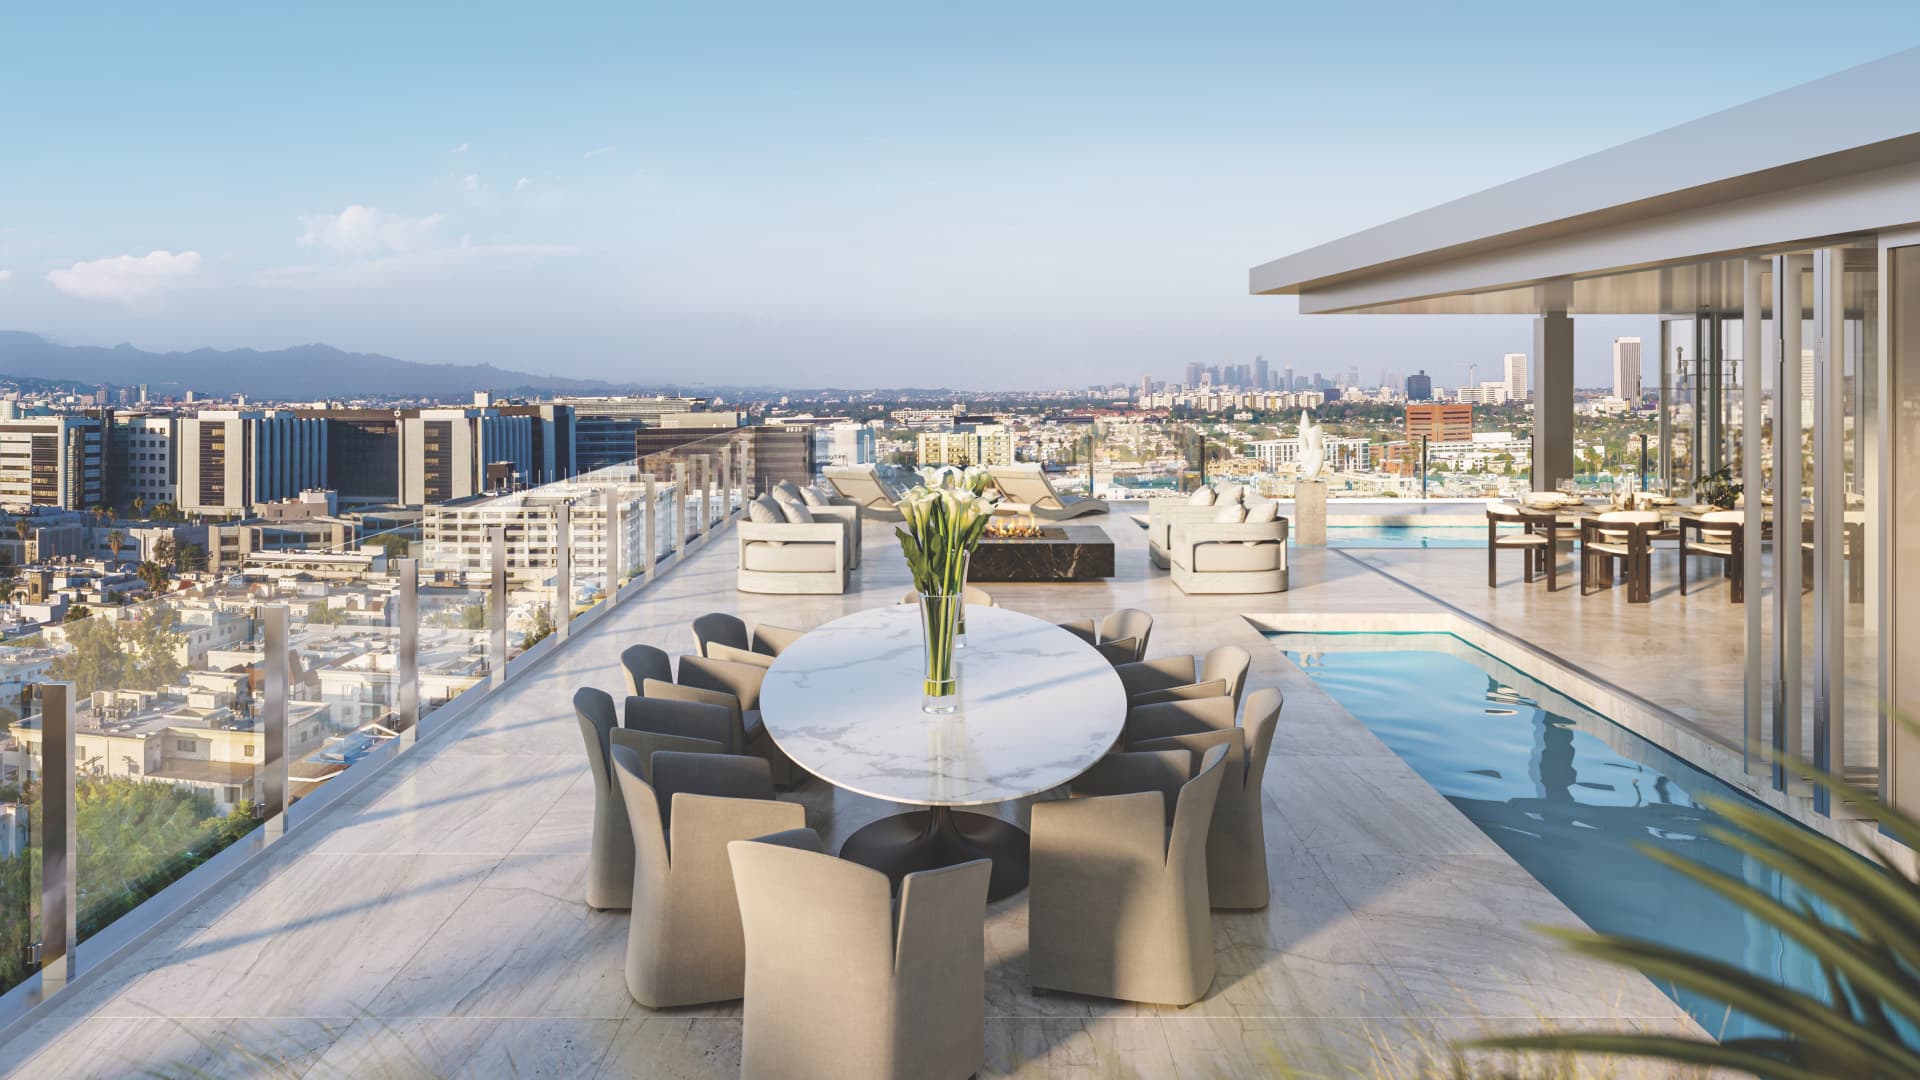 A rendering of the rooftop terrace at ONE LA.